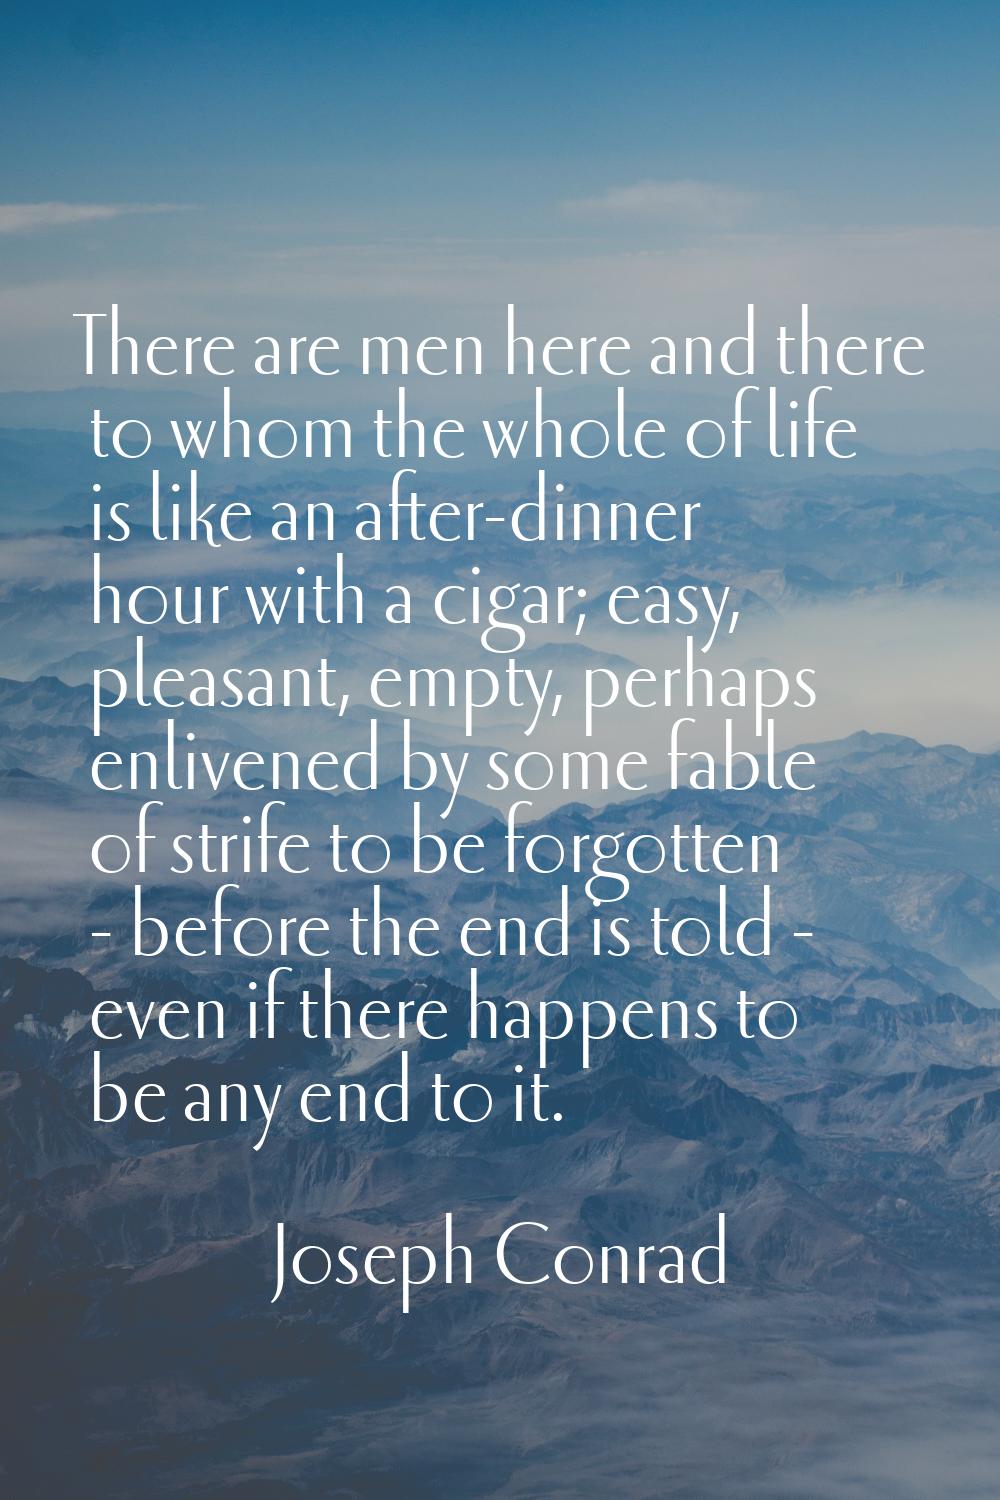 There are men here and there to whom the whole of life is like an after-dinner hour with a cigar; e